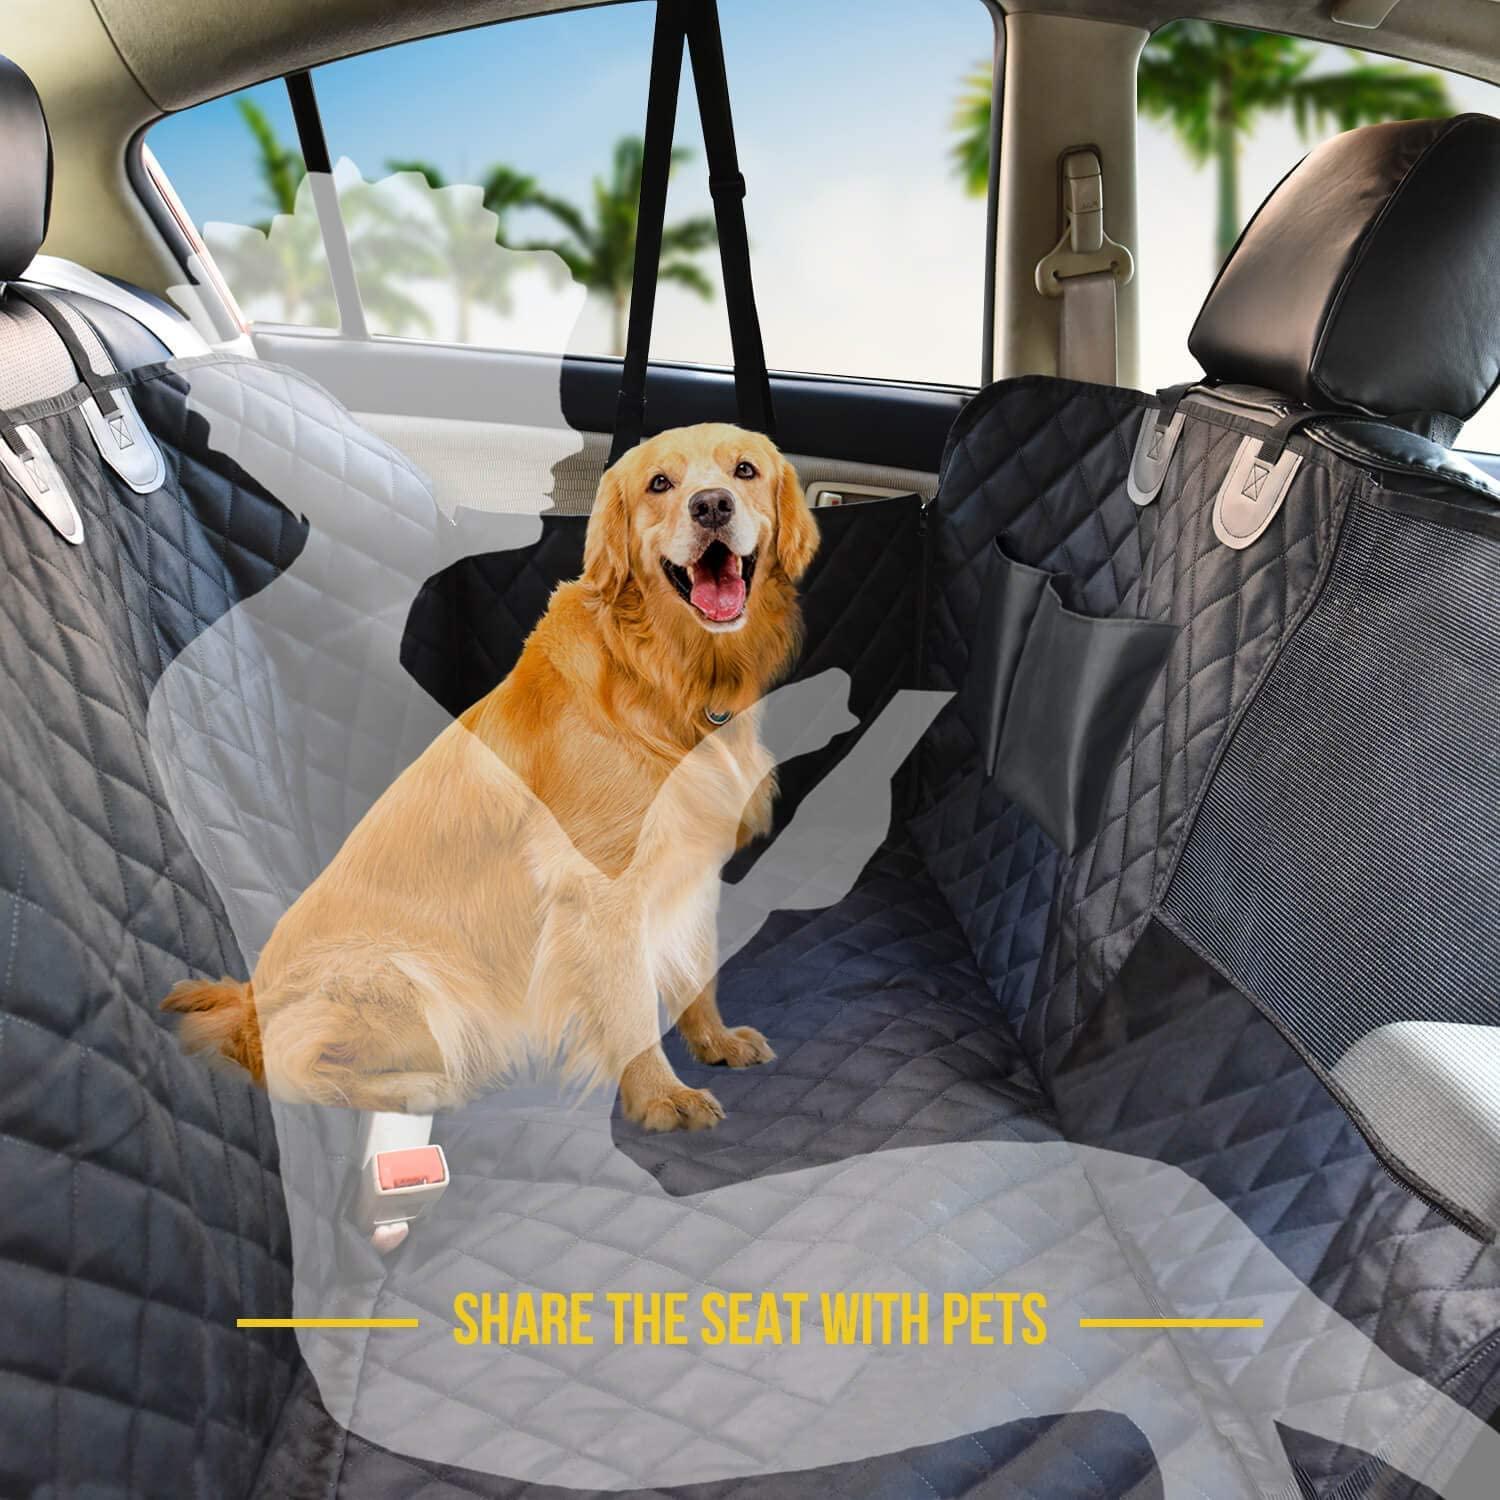 Dog Seat Covers for Backseat Car Hammock for Dogs Waterproof Mesh